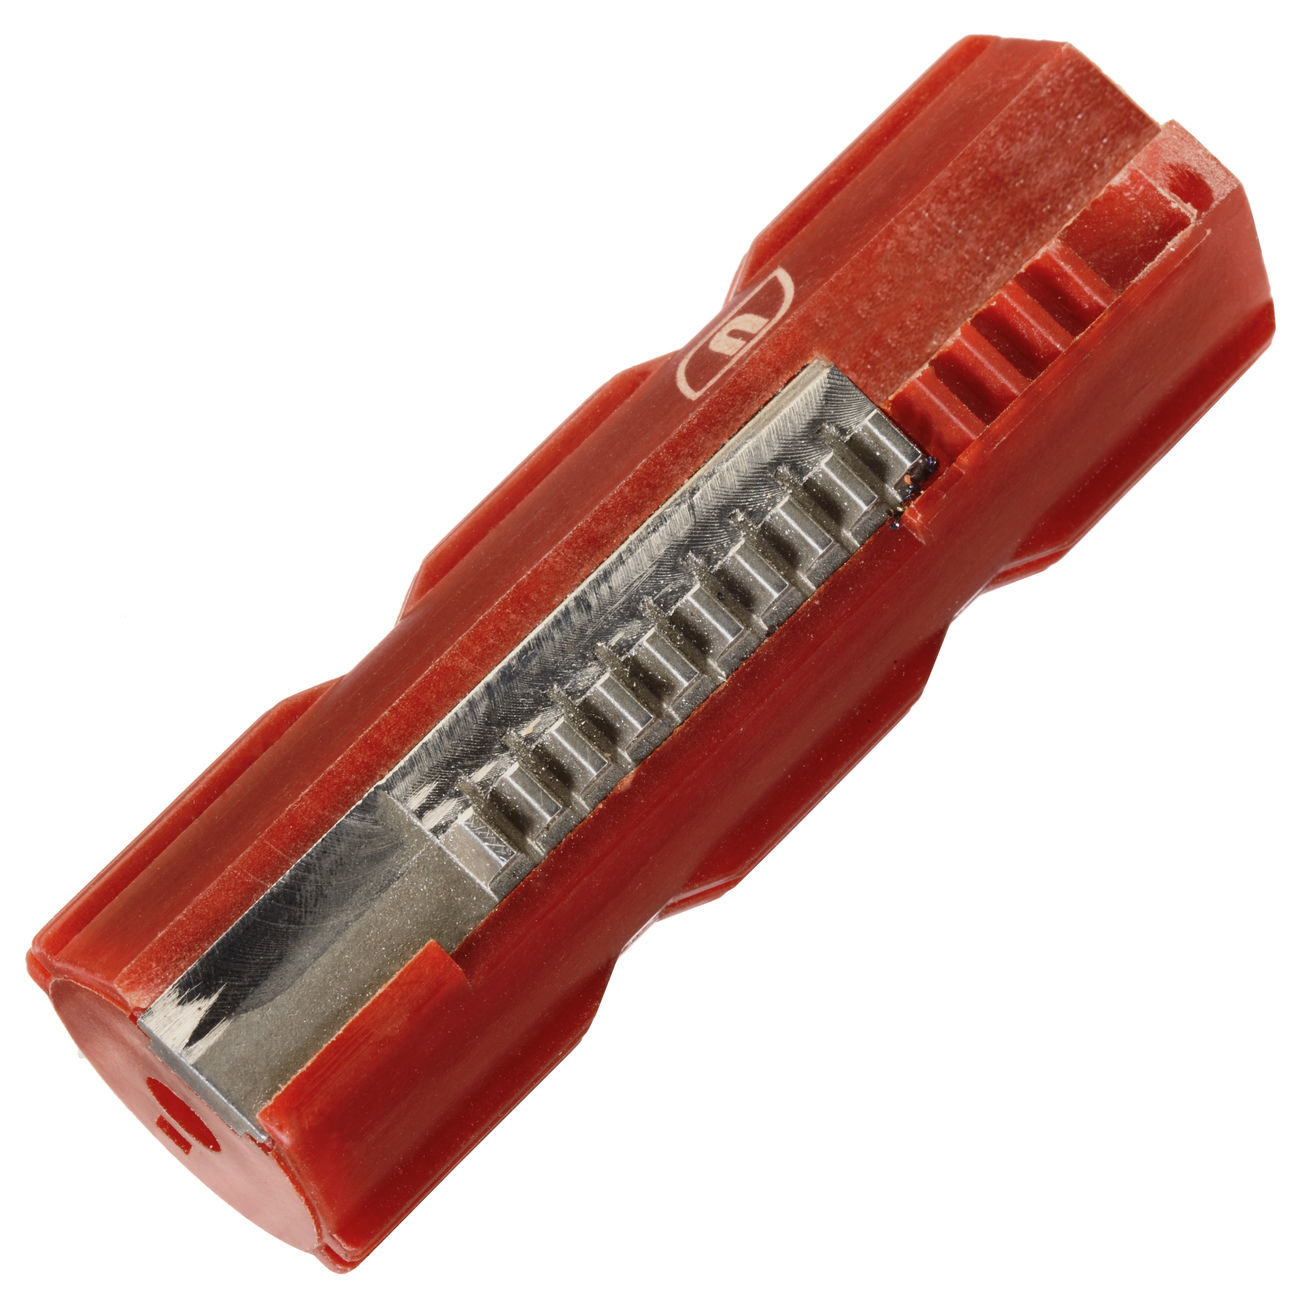 ASG Ultimate M190 Polycarbonate Piston - Red